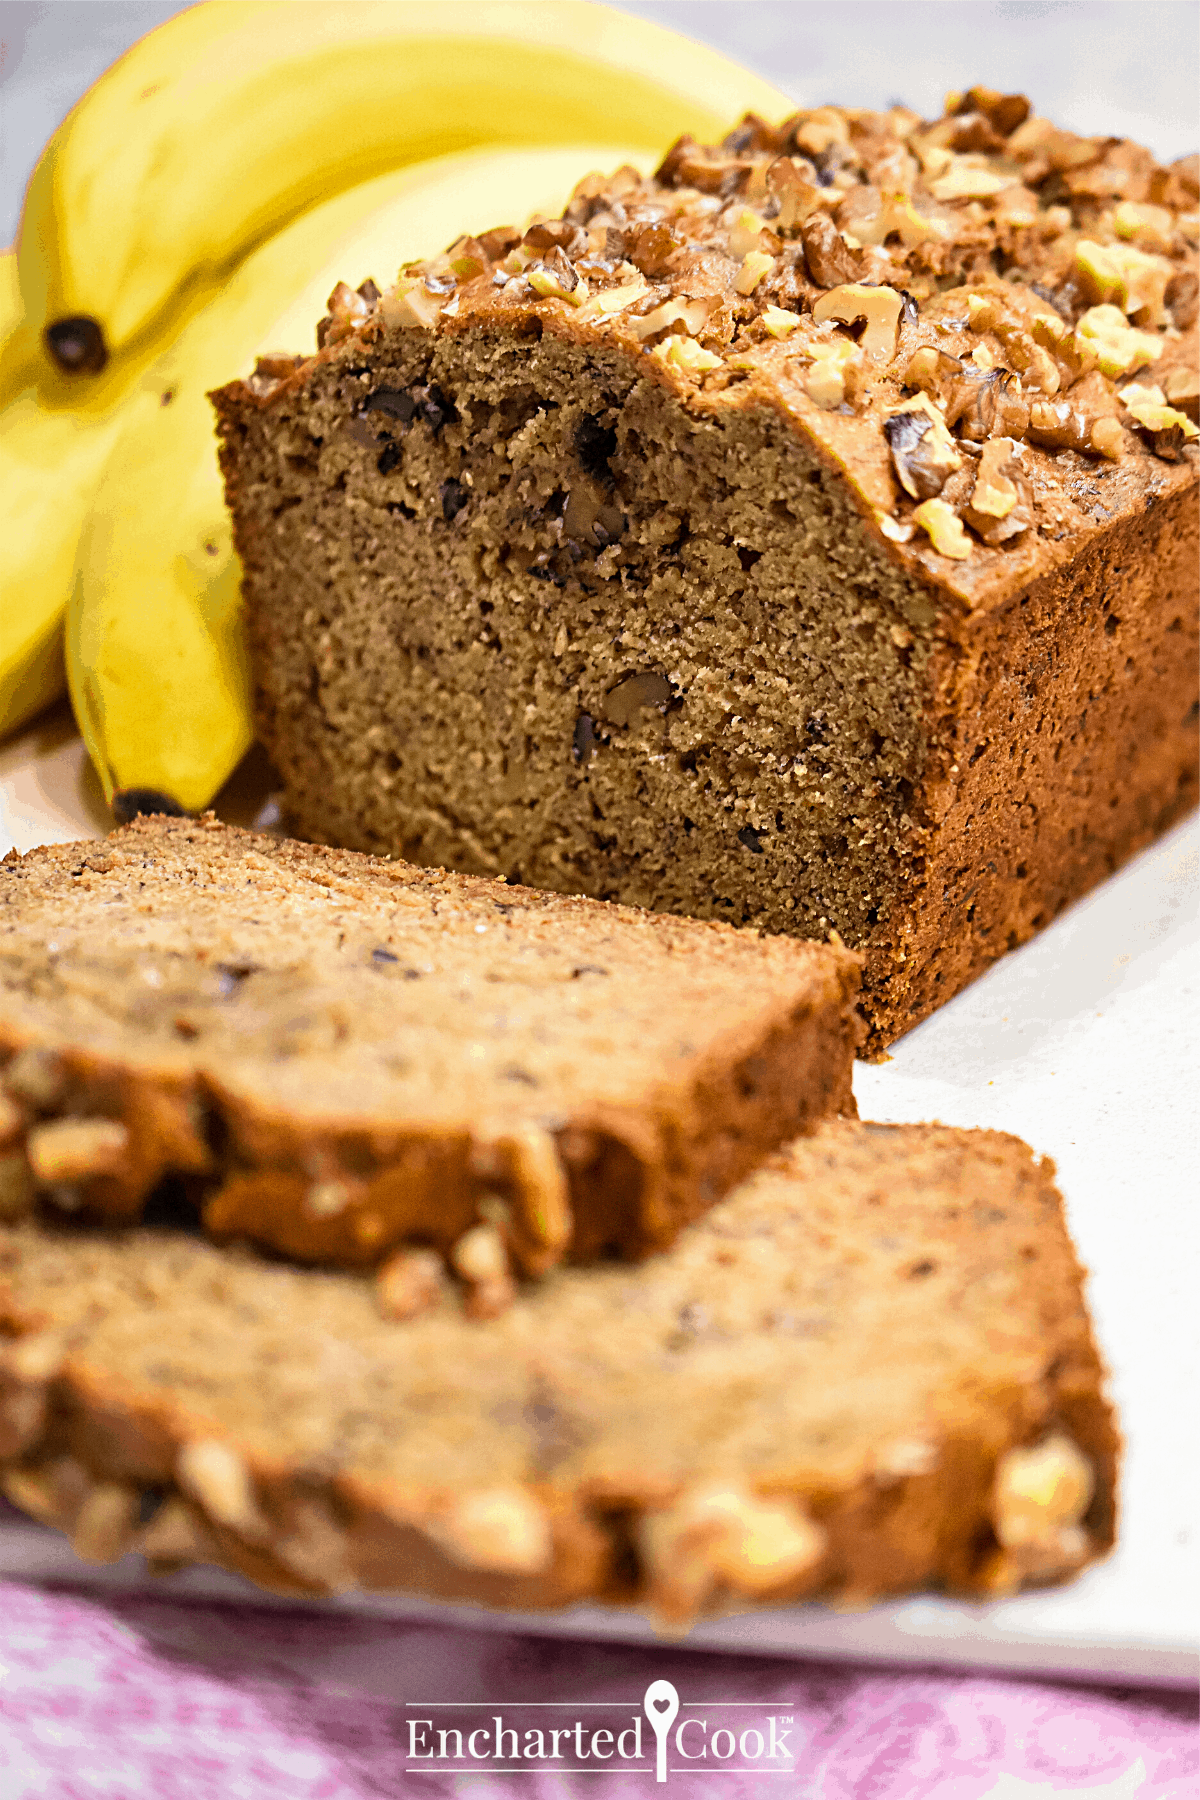 Portrait image of a sliced loaf of banana bread with bananas in the background.